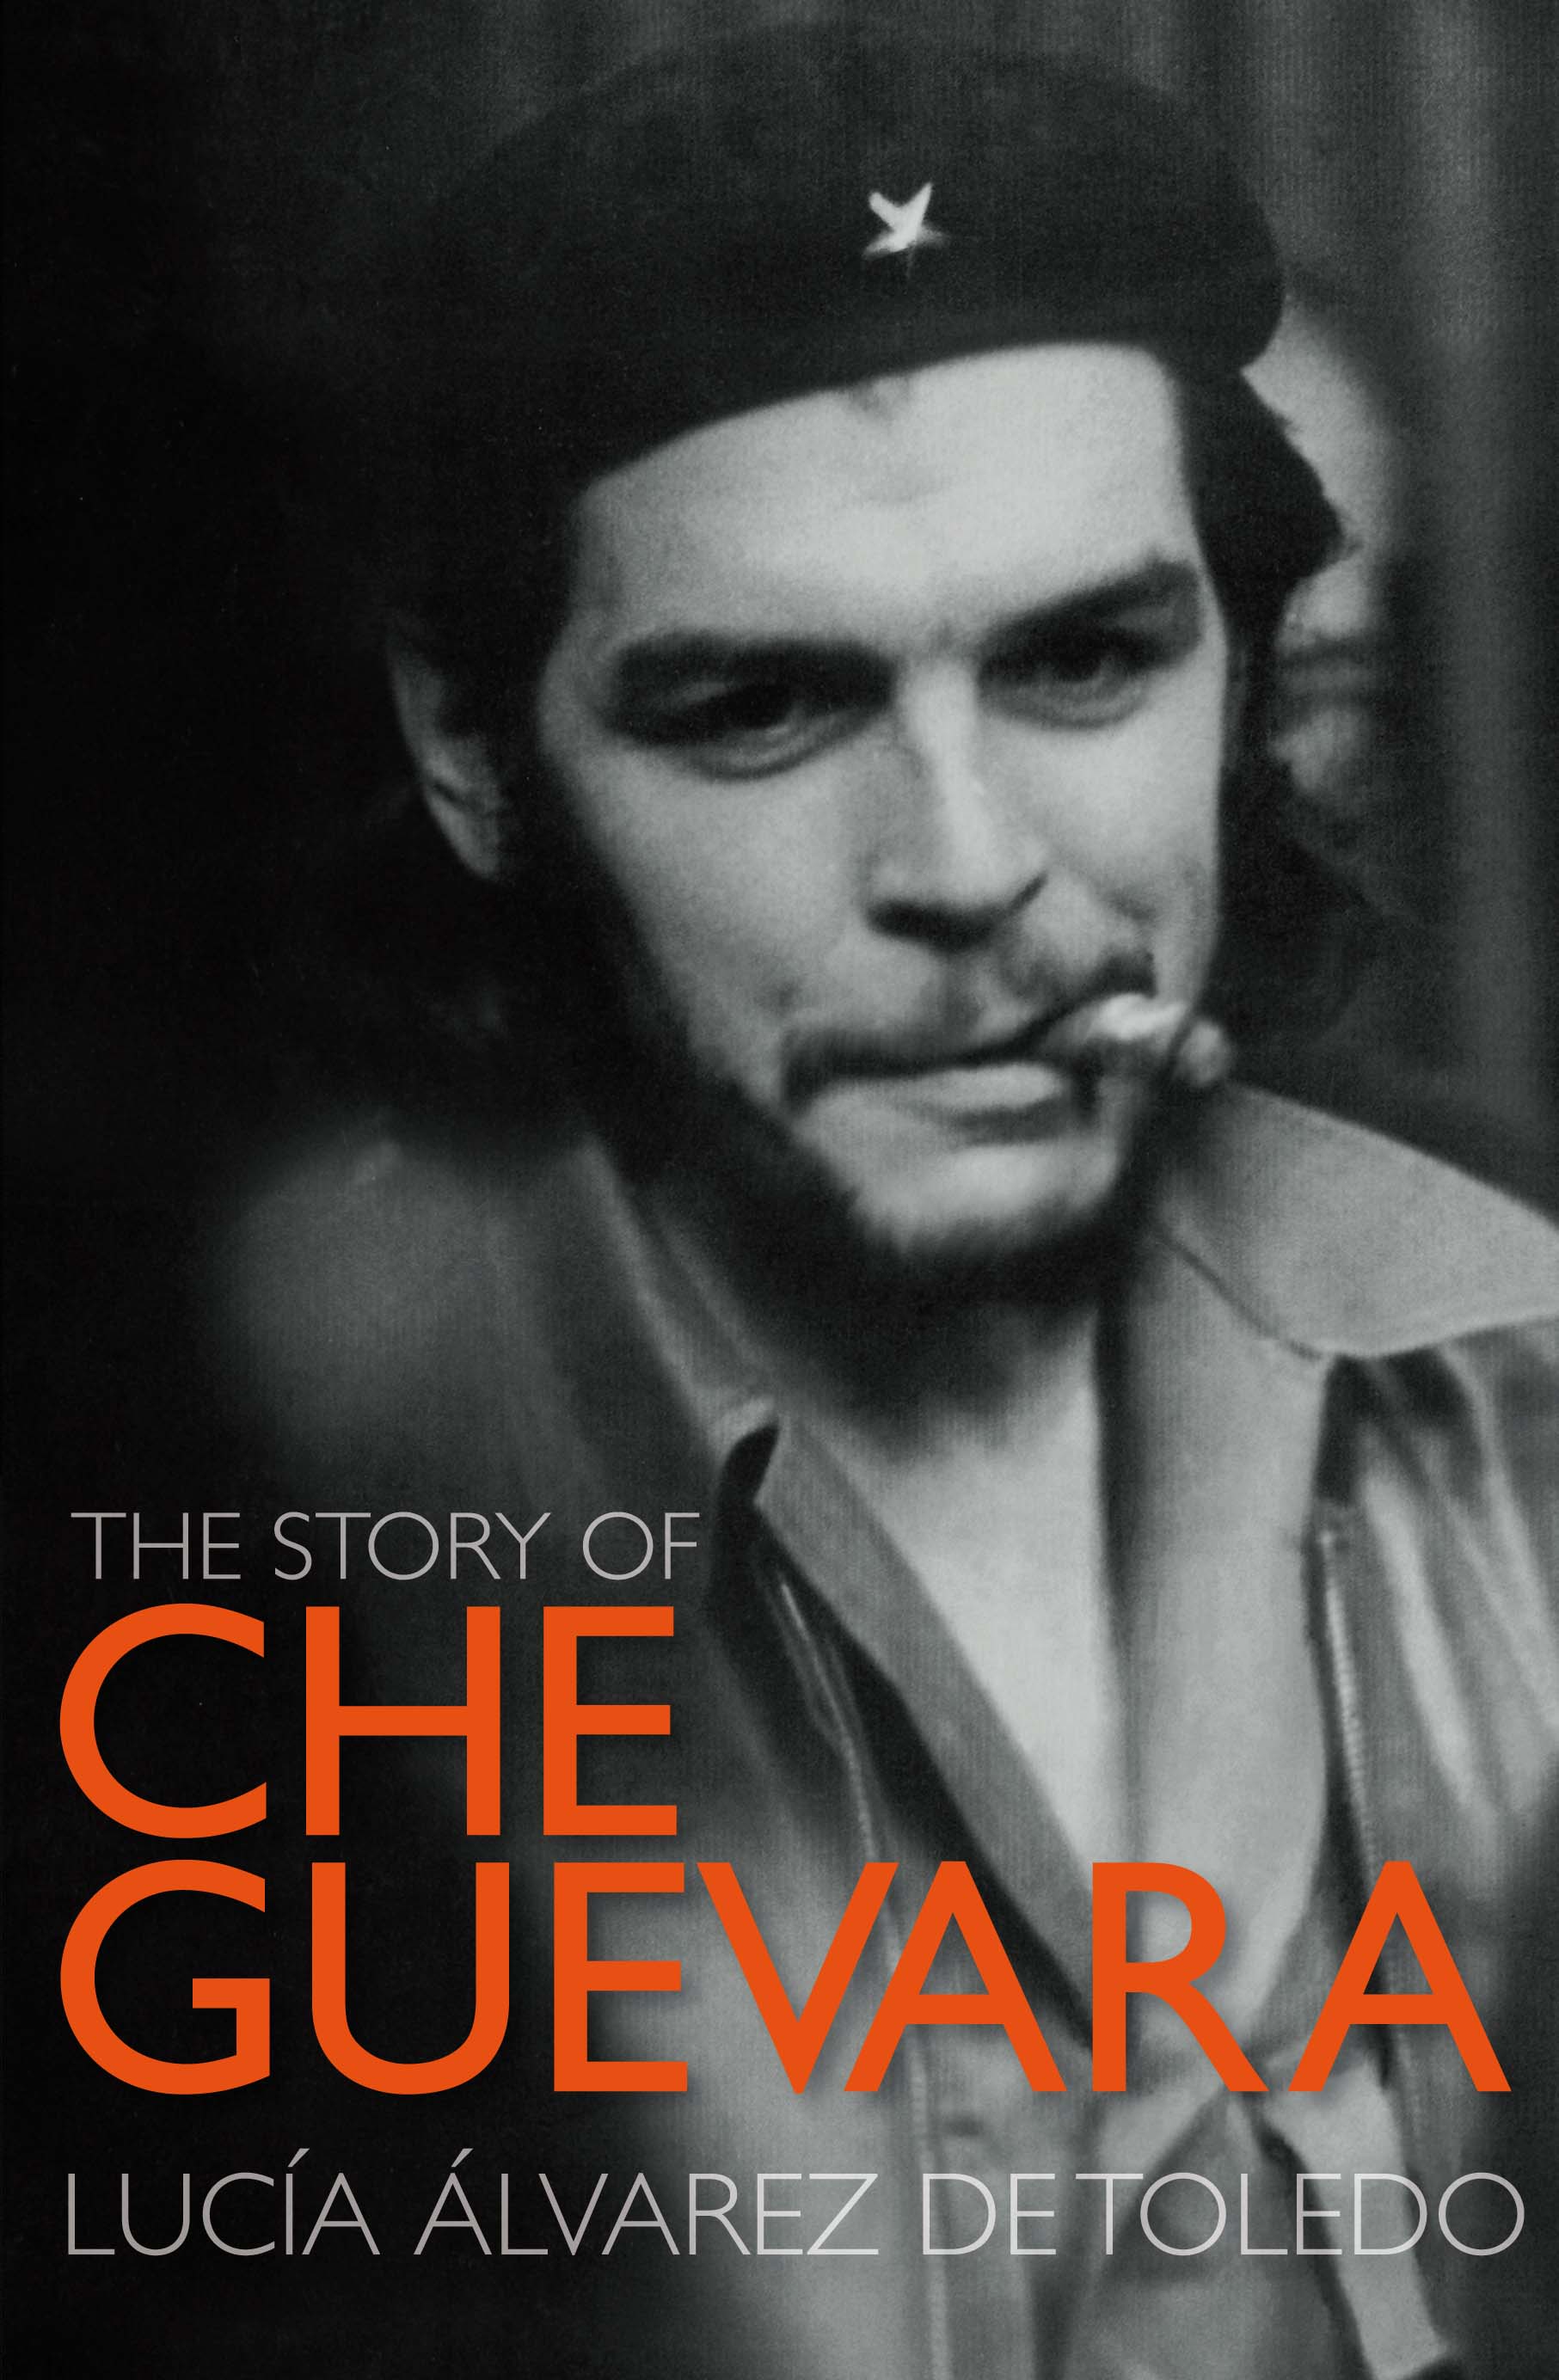 Che Guevara, The Revolutionary Picture quotes, Havana cuba and Pop